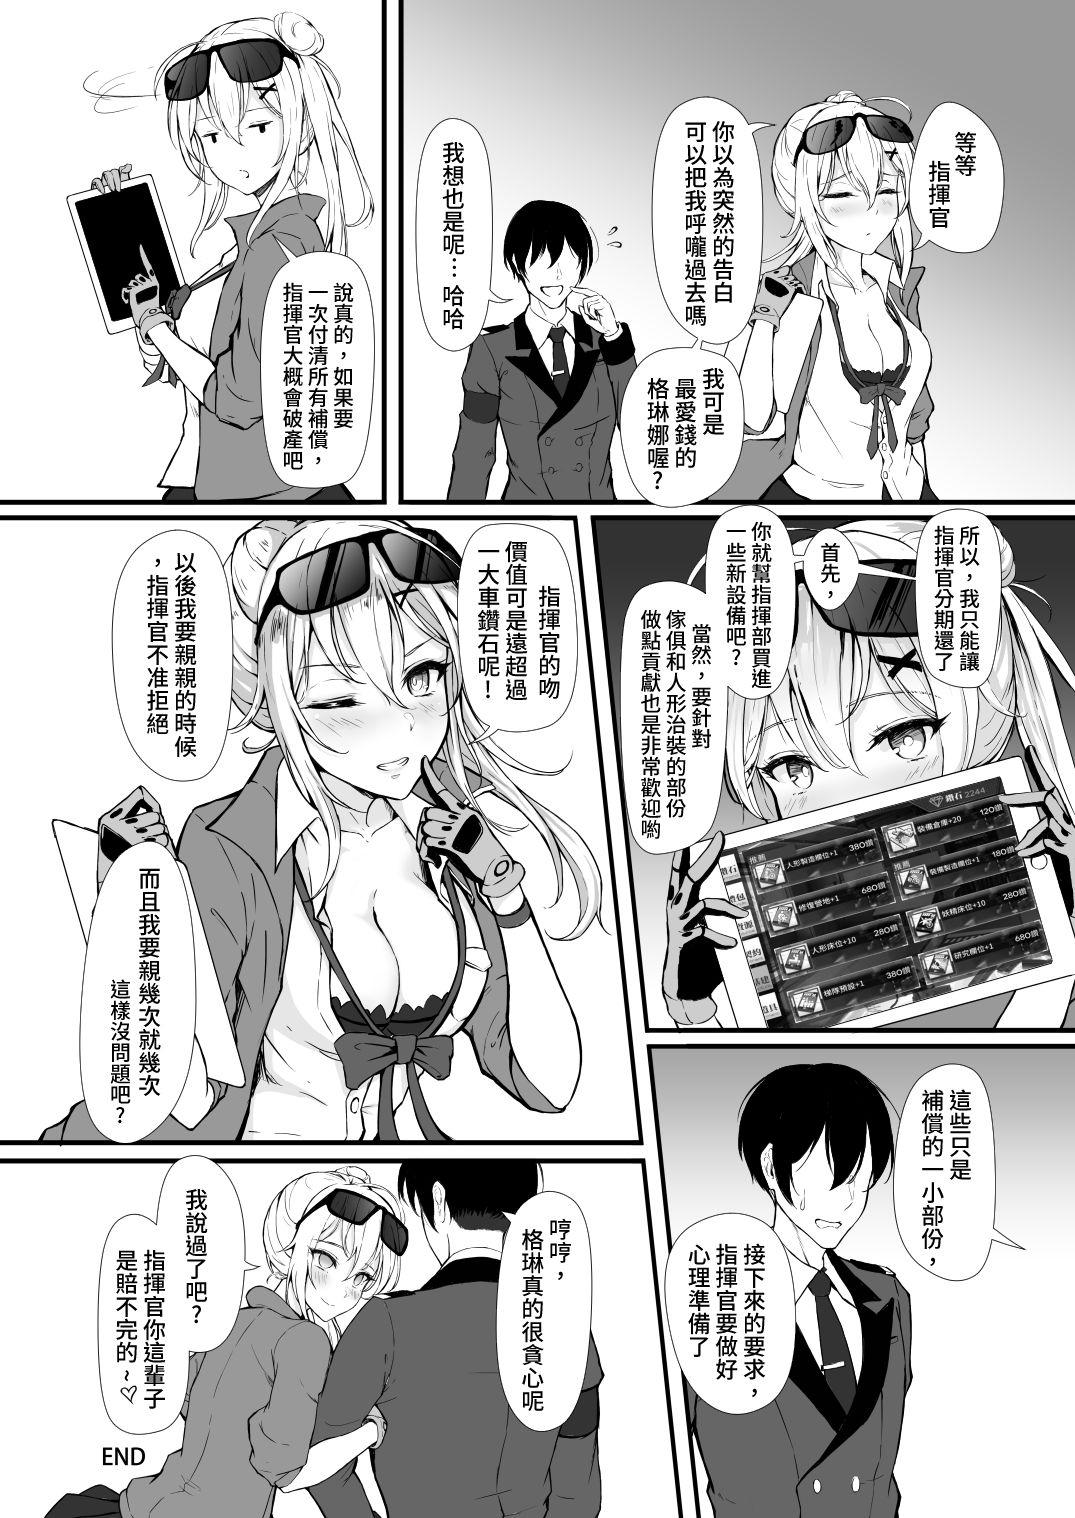 Joi How Many Diamonds a Kiss Worth? - Girls frontline Stepfamily - Page 35